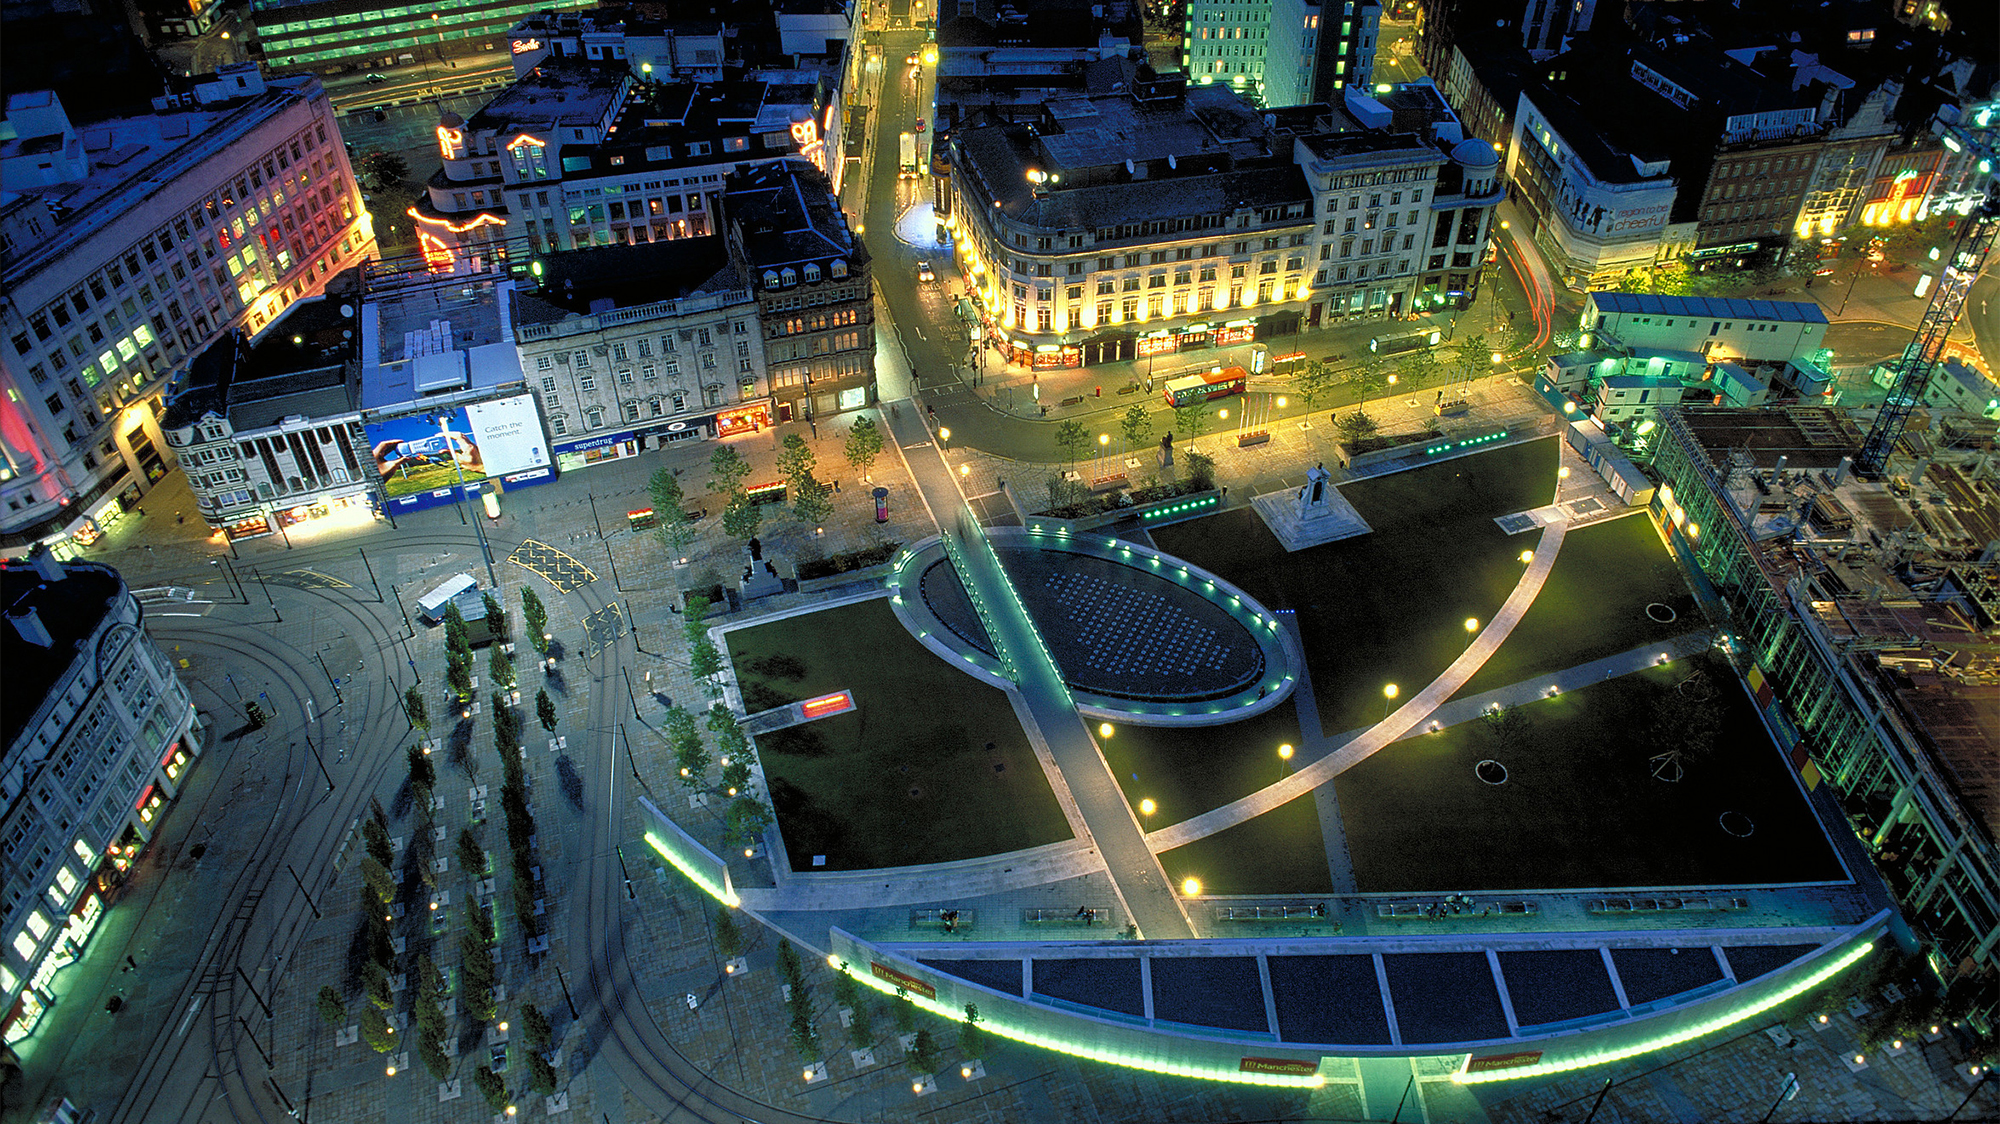 Piccadilly Gardens - Arup